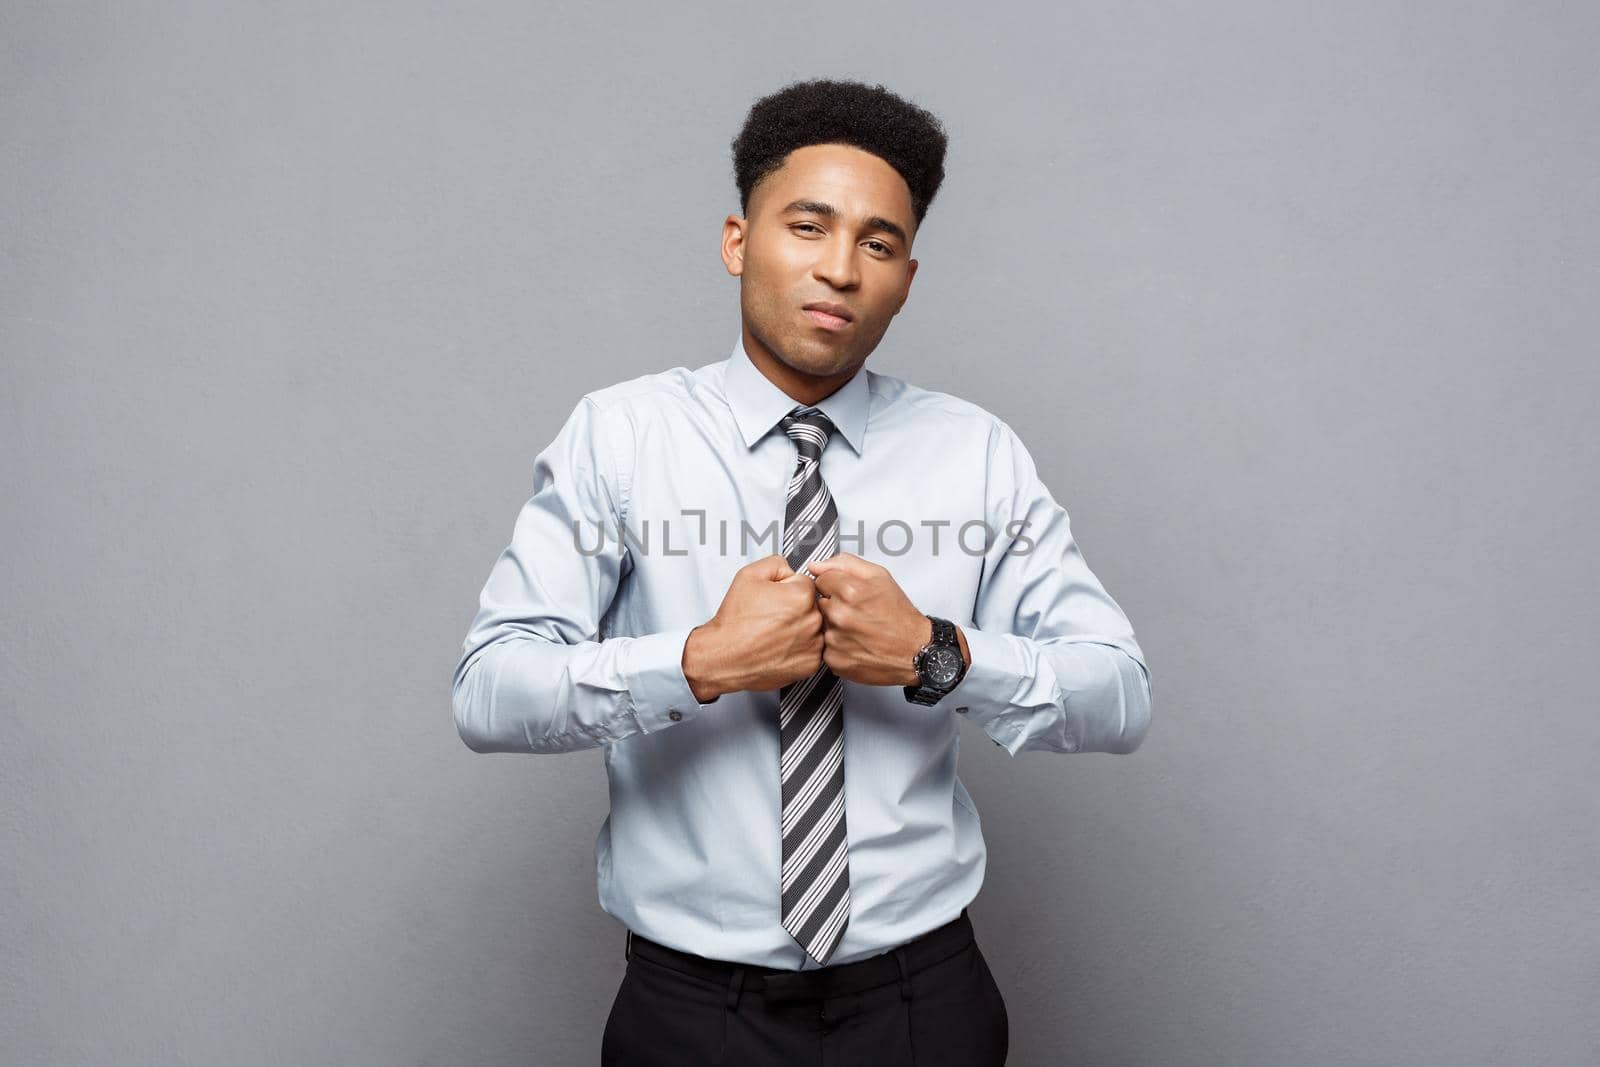 Business Concept - Confident cheerful young African American in boxing poseture over grey background